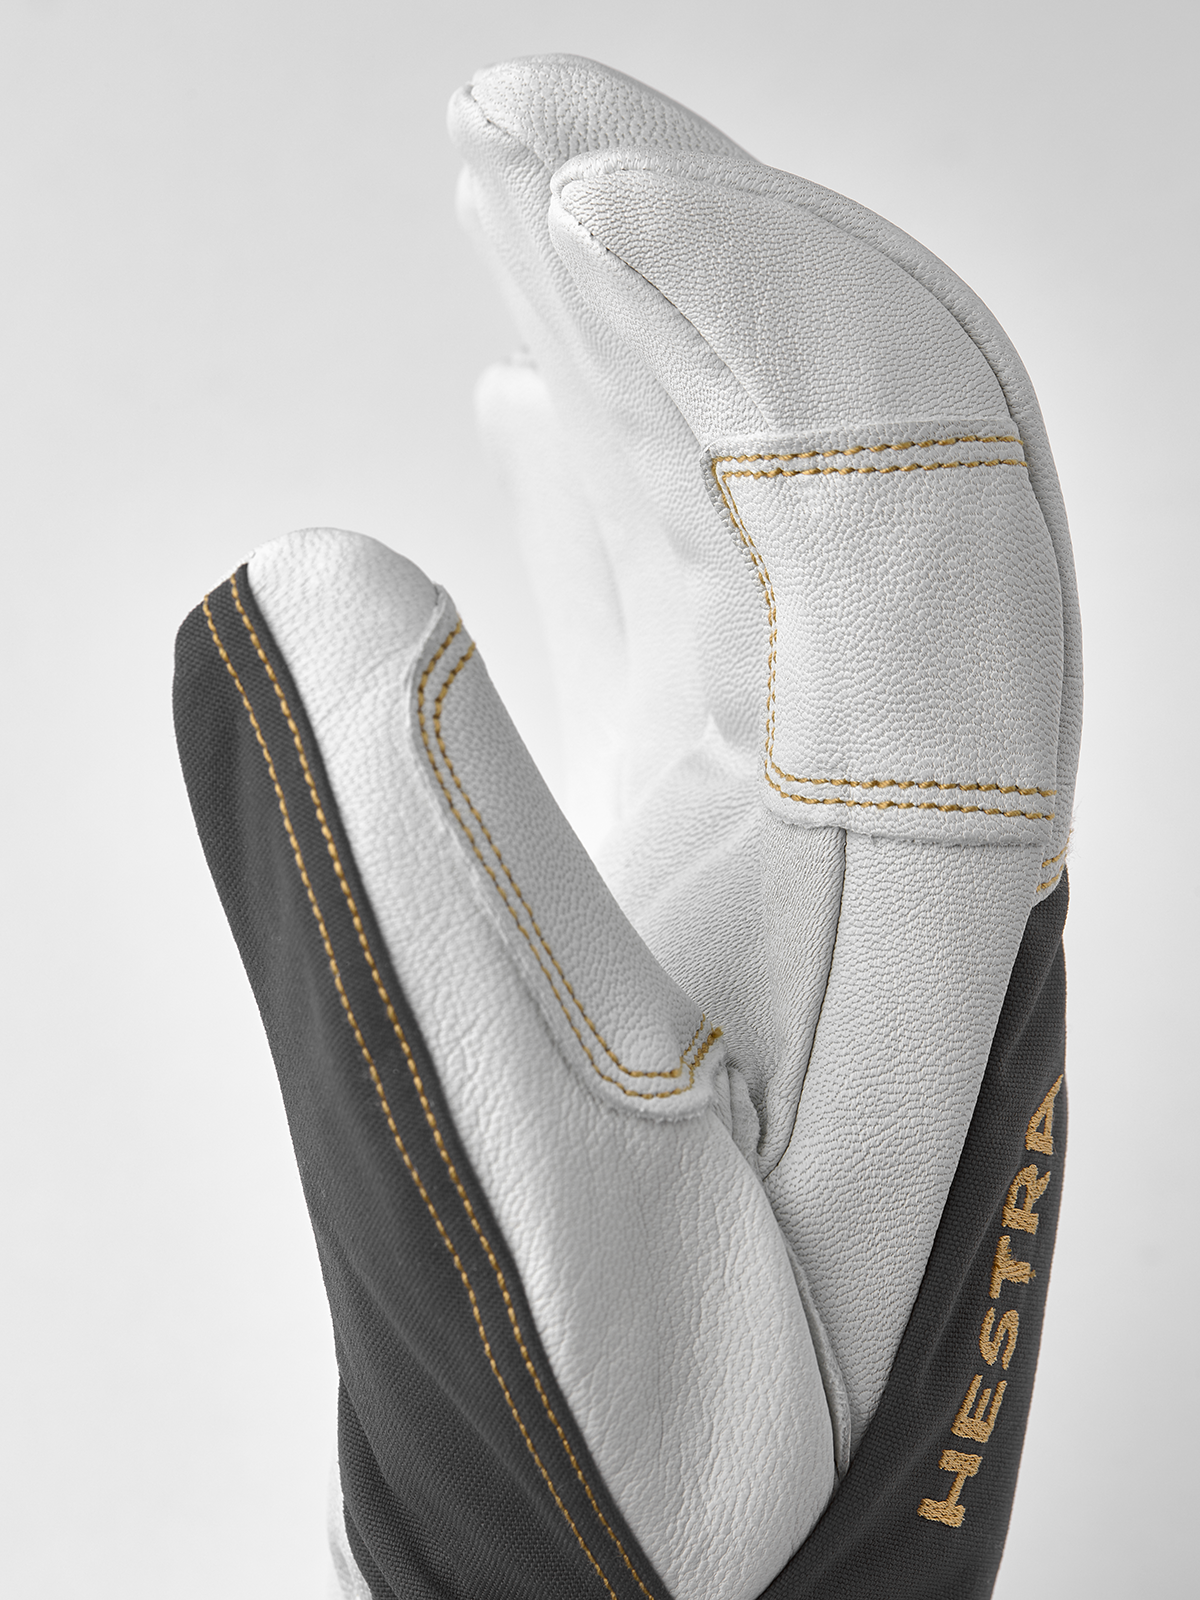 Army Leather GORE-TEX - Grey | Hestra Gloves